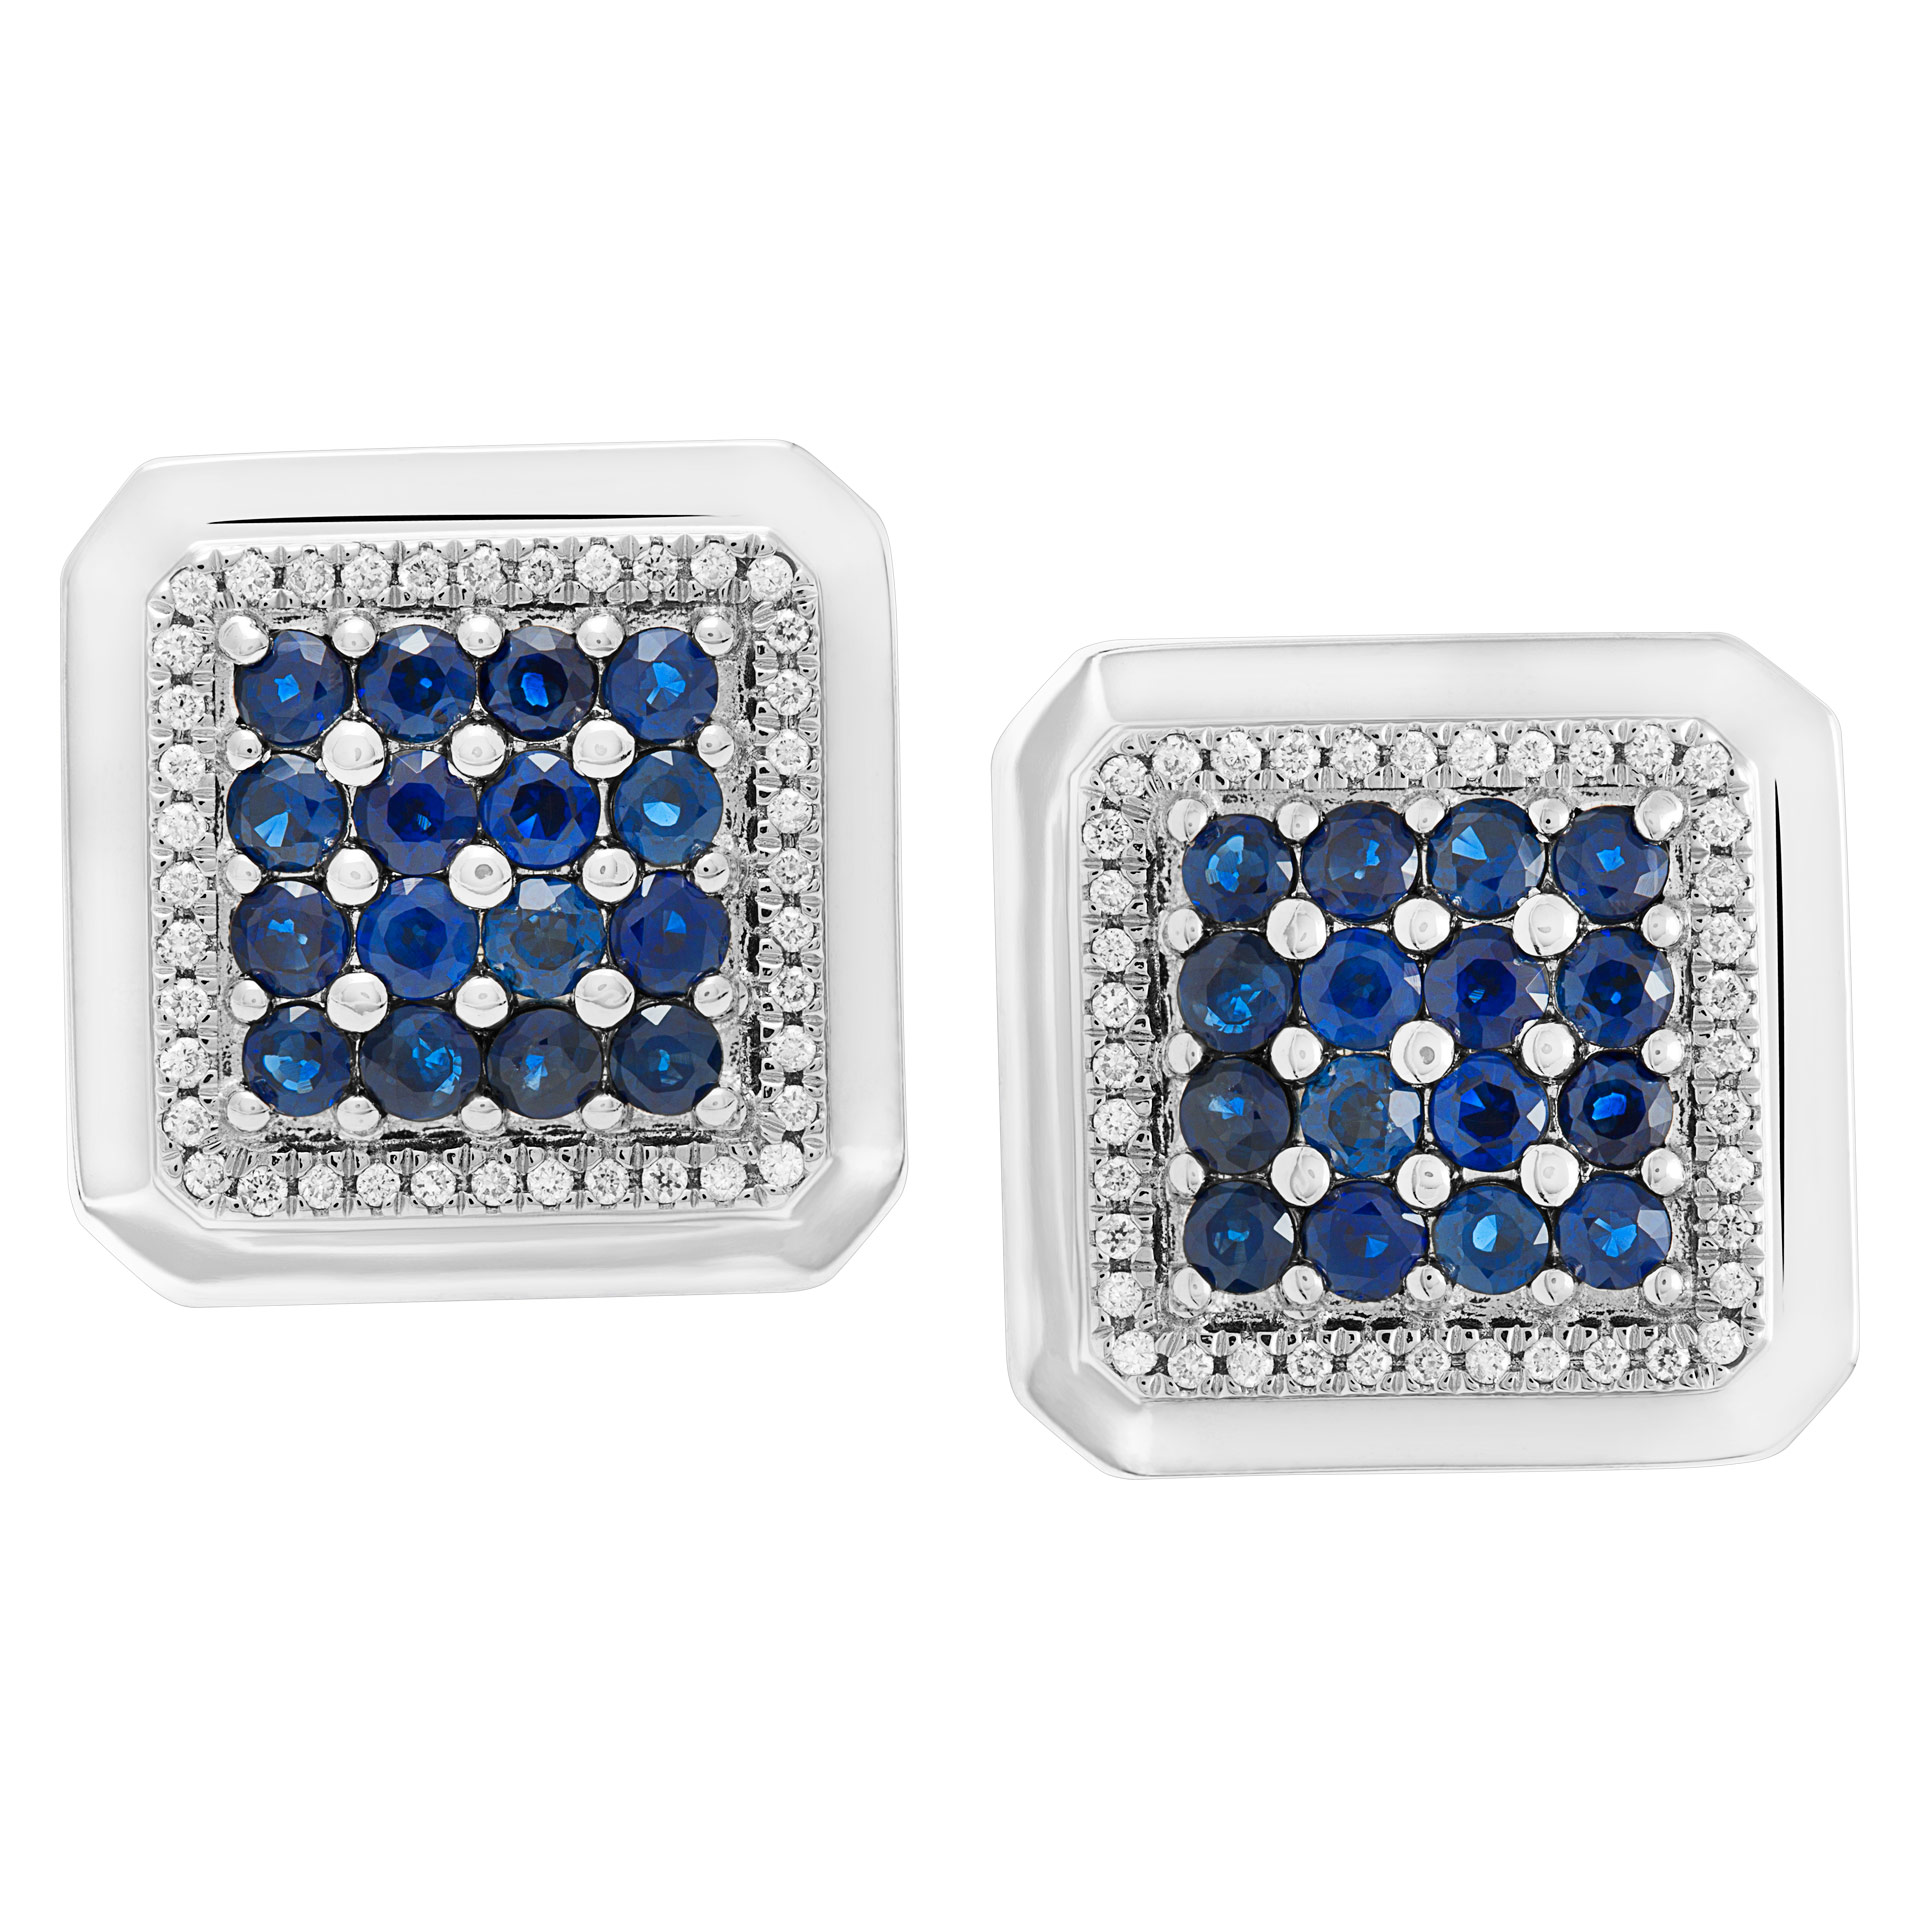 18k white gold cufflinks with diamonds and sapphires image 1